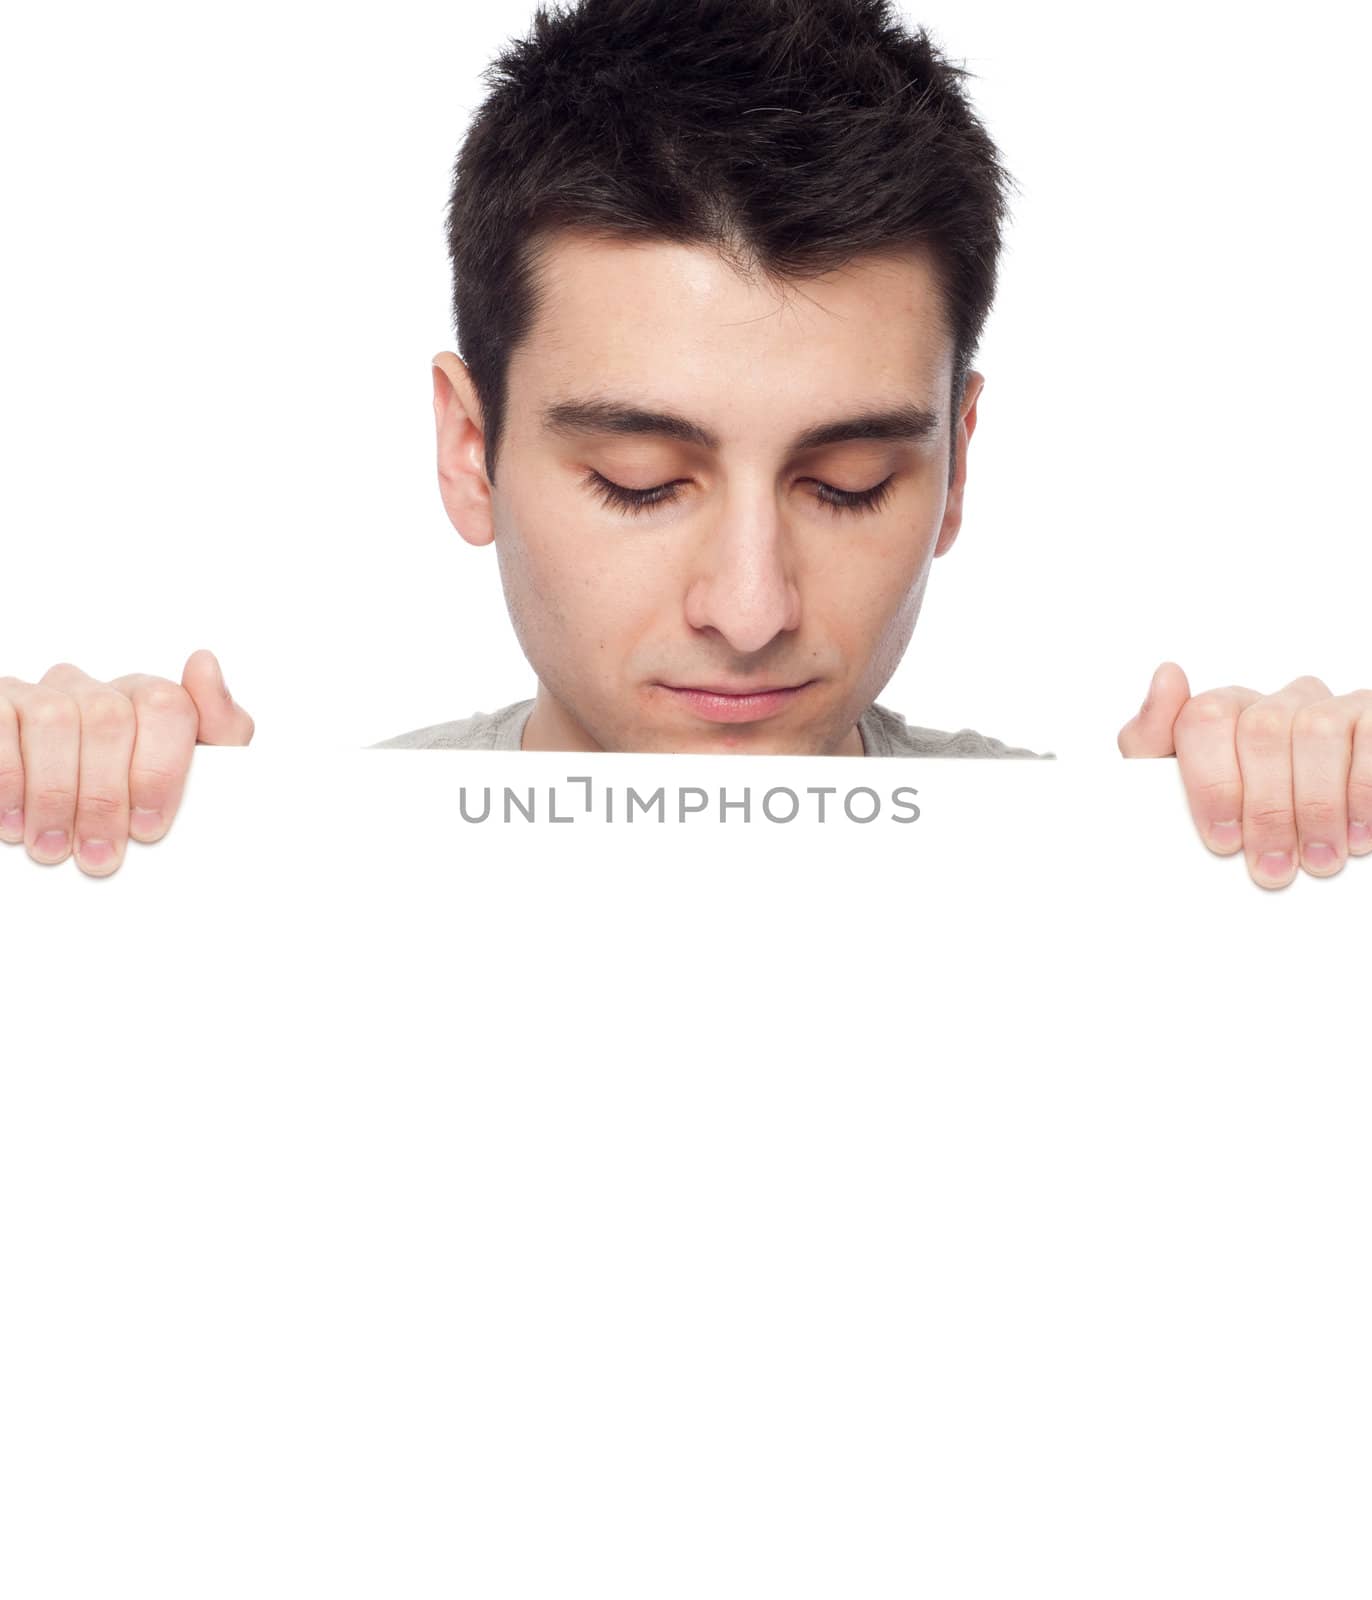 handsome young man displaying a banner ad isolated on white background 